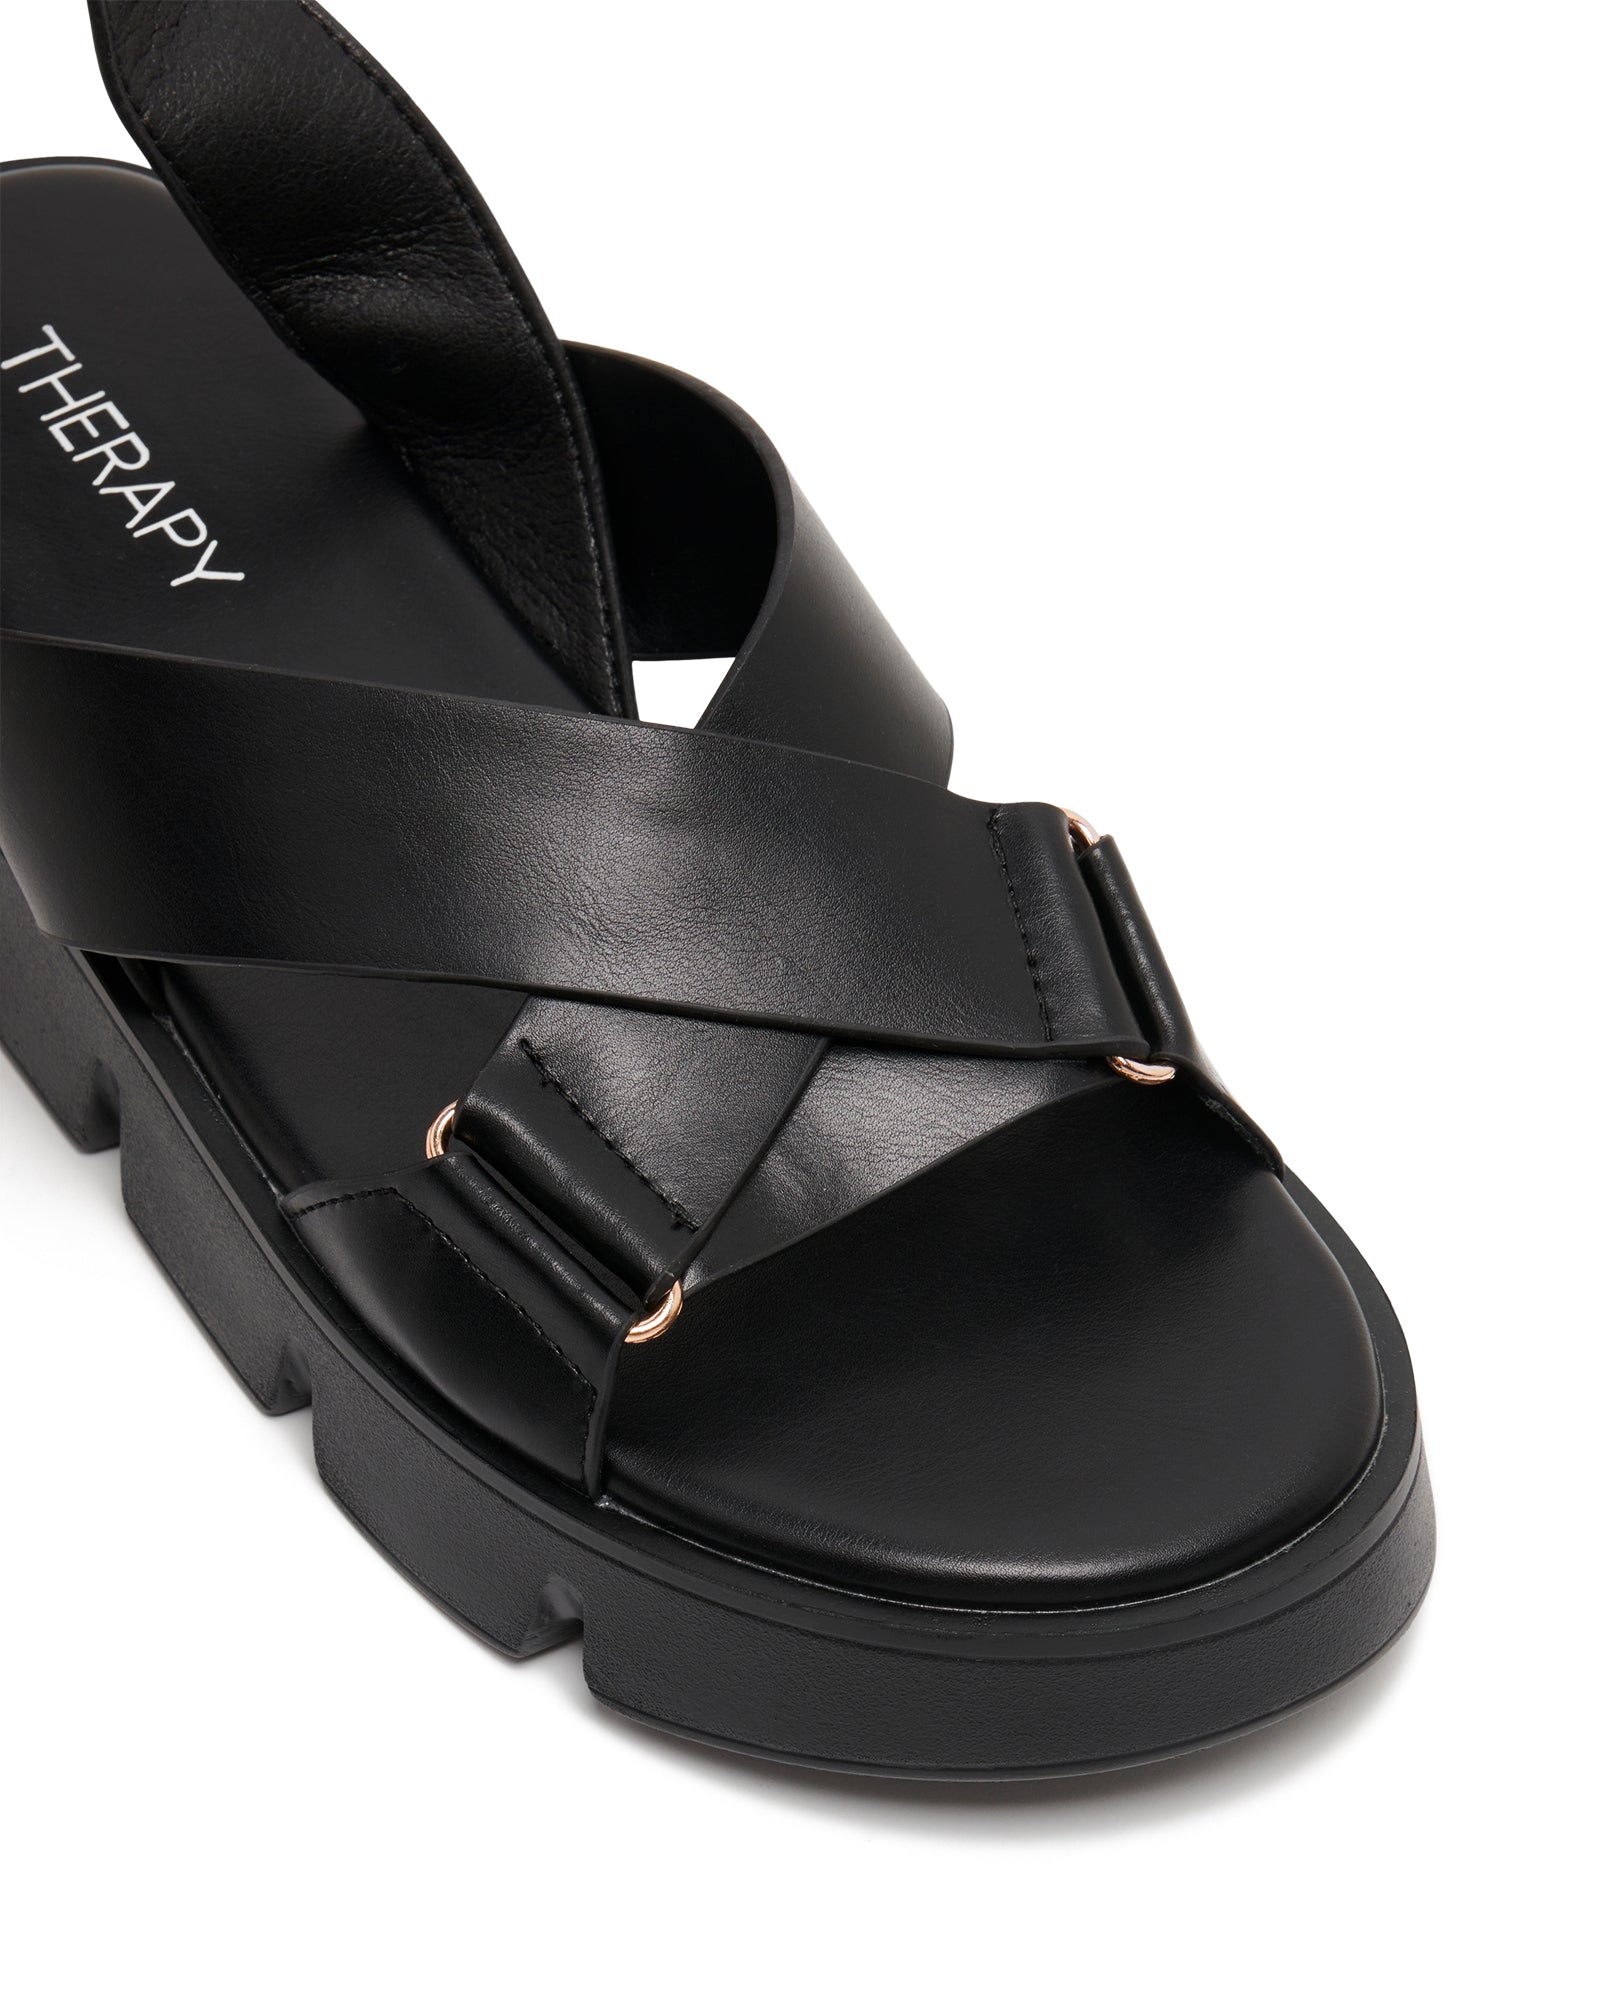 Therapy Shoes Maze Black Smooth | Women's Sandals | Chunky | Flatform